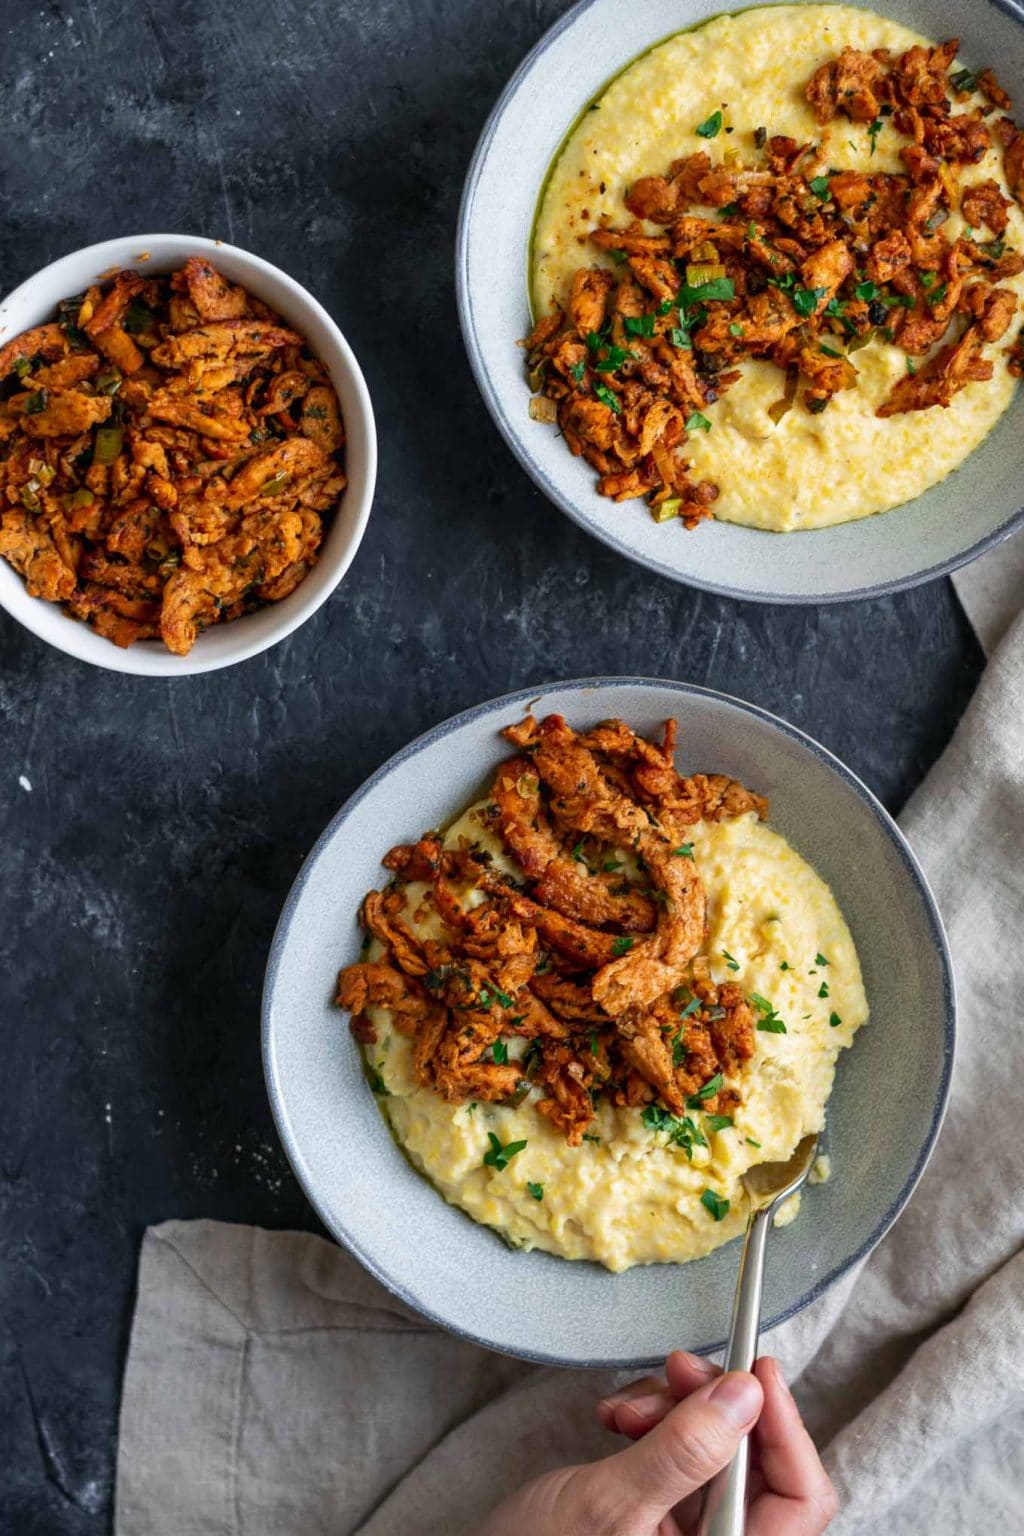 Cajun soy curls and creamy vegan jalapeño grits, 2 bowls with a fork taking a scoop of grits out of the bottom bowl and an extra bowl of cajun soy curls